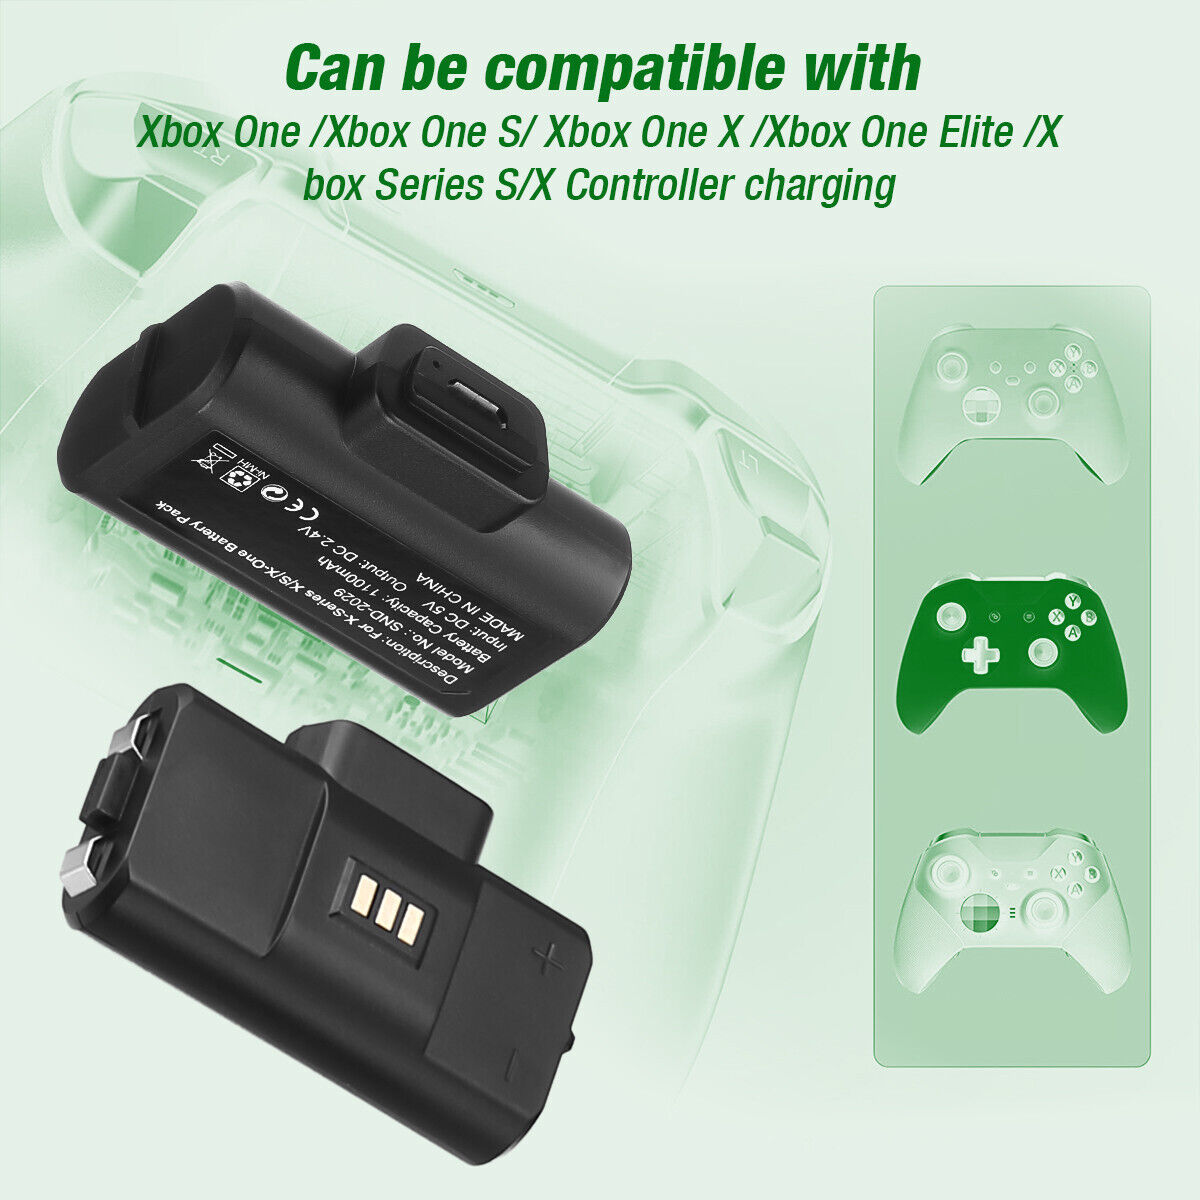 Rechargeable Battery Pack For XBox One X/S Series X/S Controller & Charger Cable EBL - фотография #4